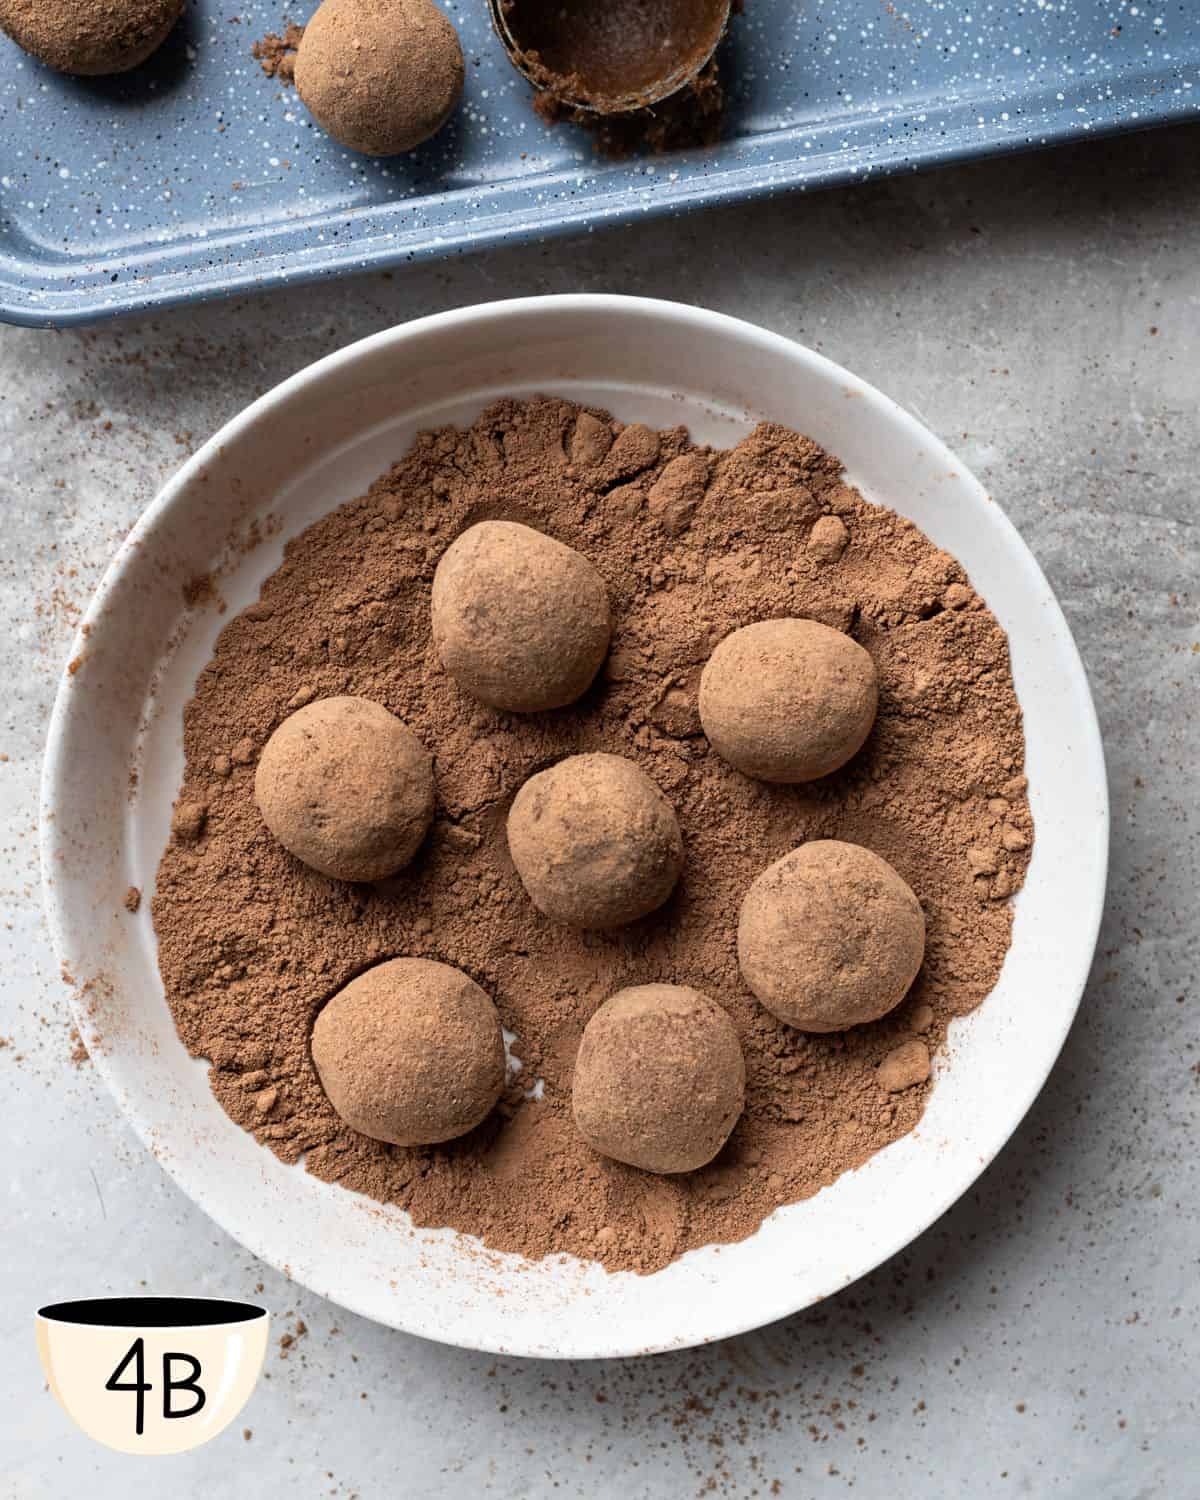 Several chocolate bliss balls for kids, covered in cocoa powder, sitting on a white dish with a light dusting of cocoa powder, showcasing the finished product.